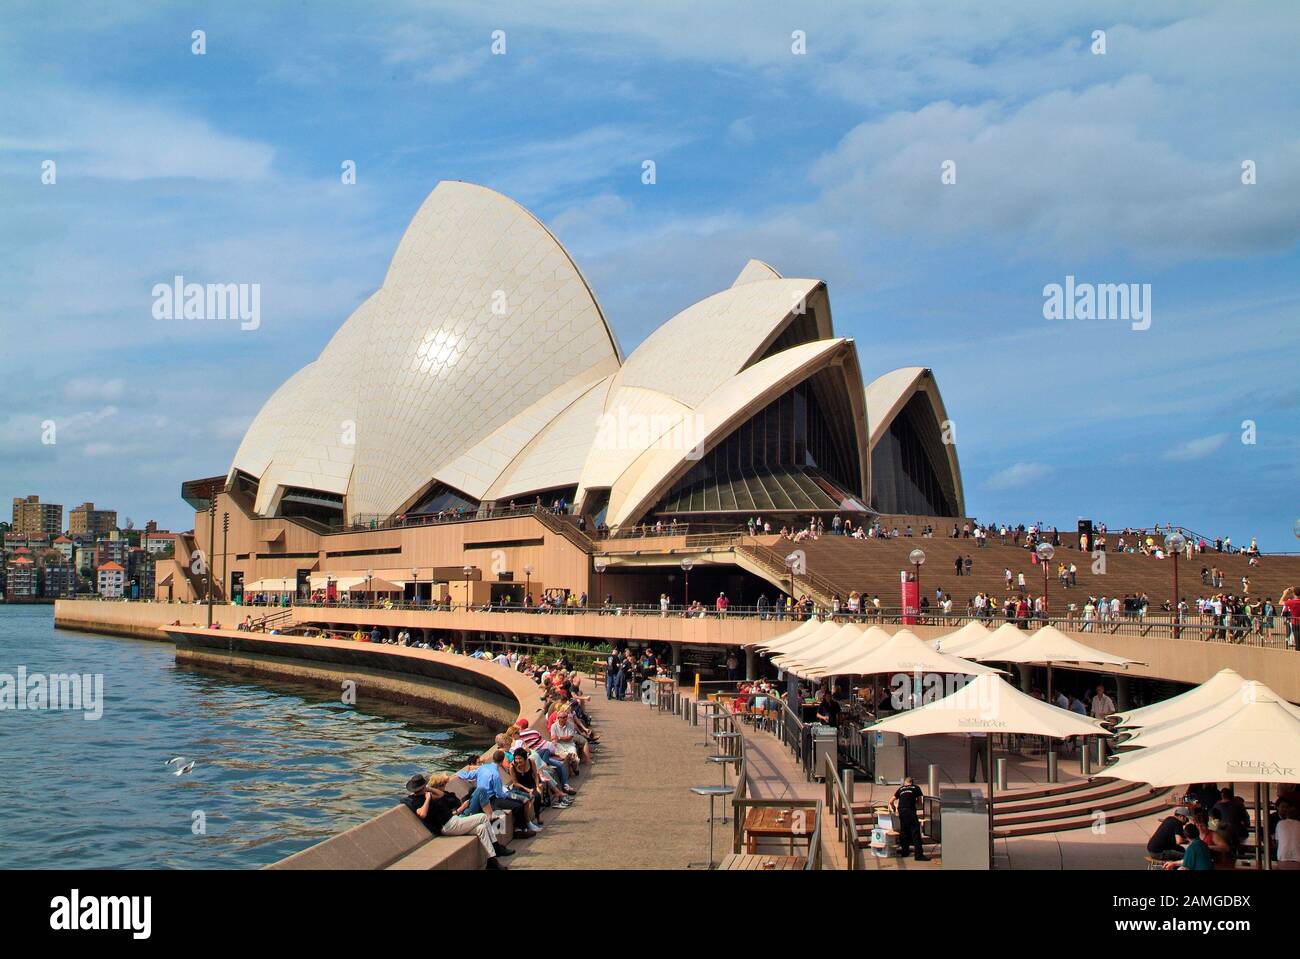 Sydney, Australia - February 08, 2008: Unidentified people on Circular Quay with restaurants and cafe's and impressive Sydney Opera building, a prefer Stock Photo